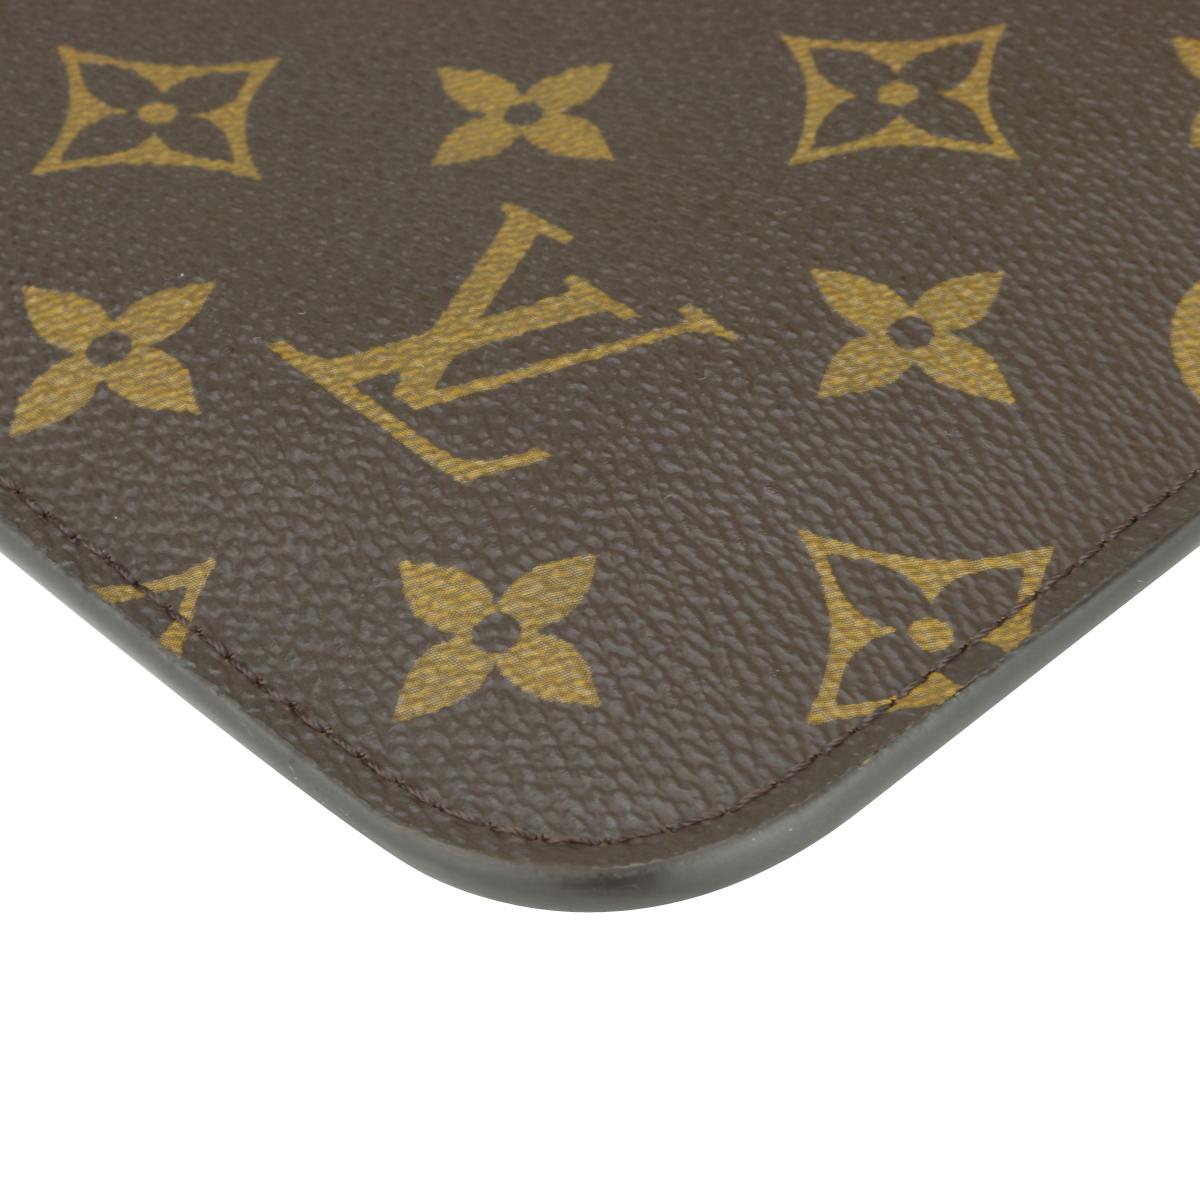 Louis Vuitton Neverfull MM Pochette Pouch in Monogram with Red Interior 2020 6